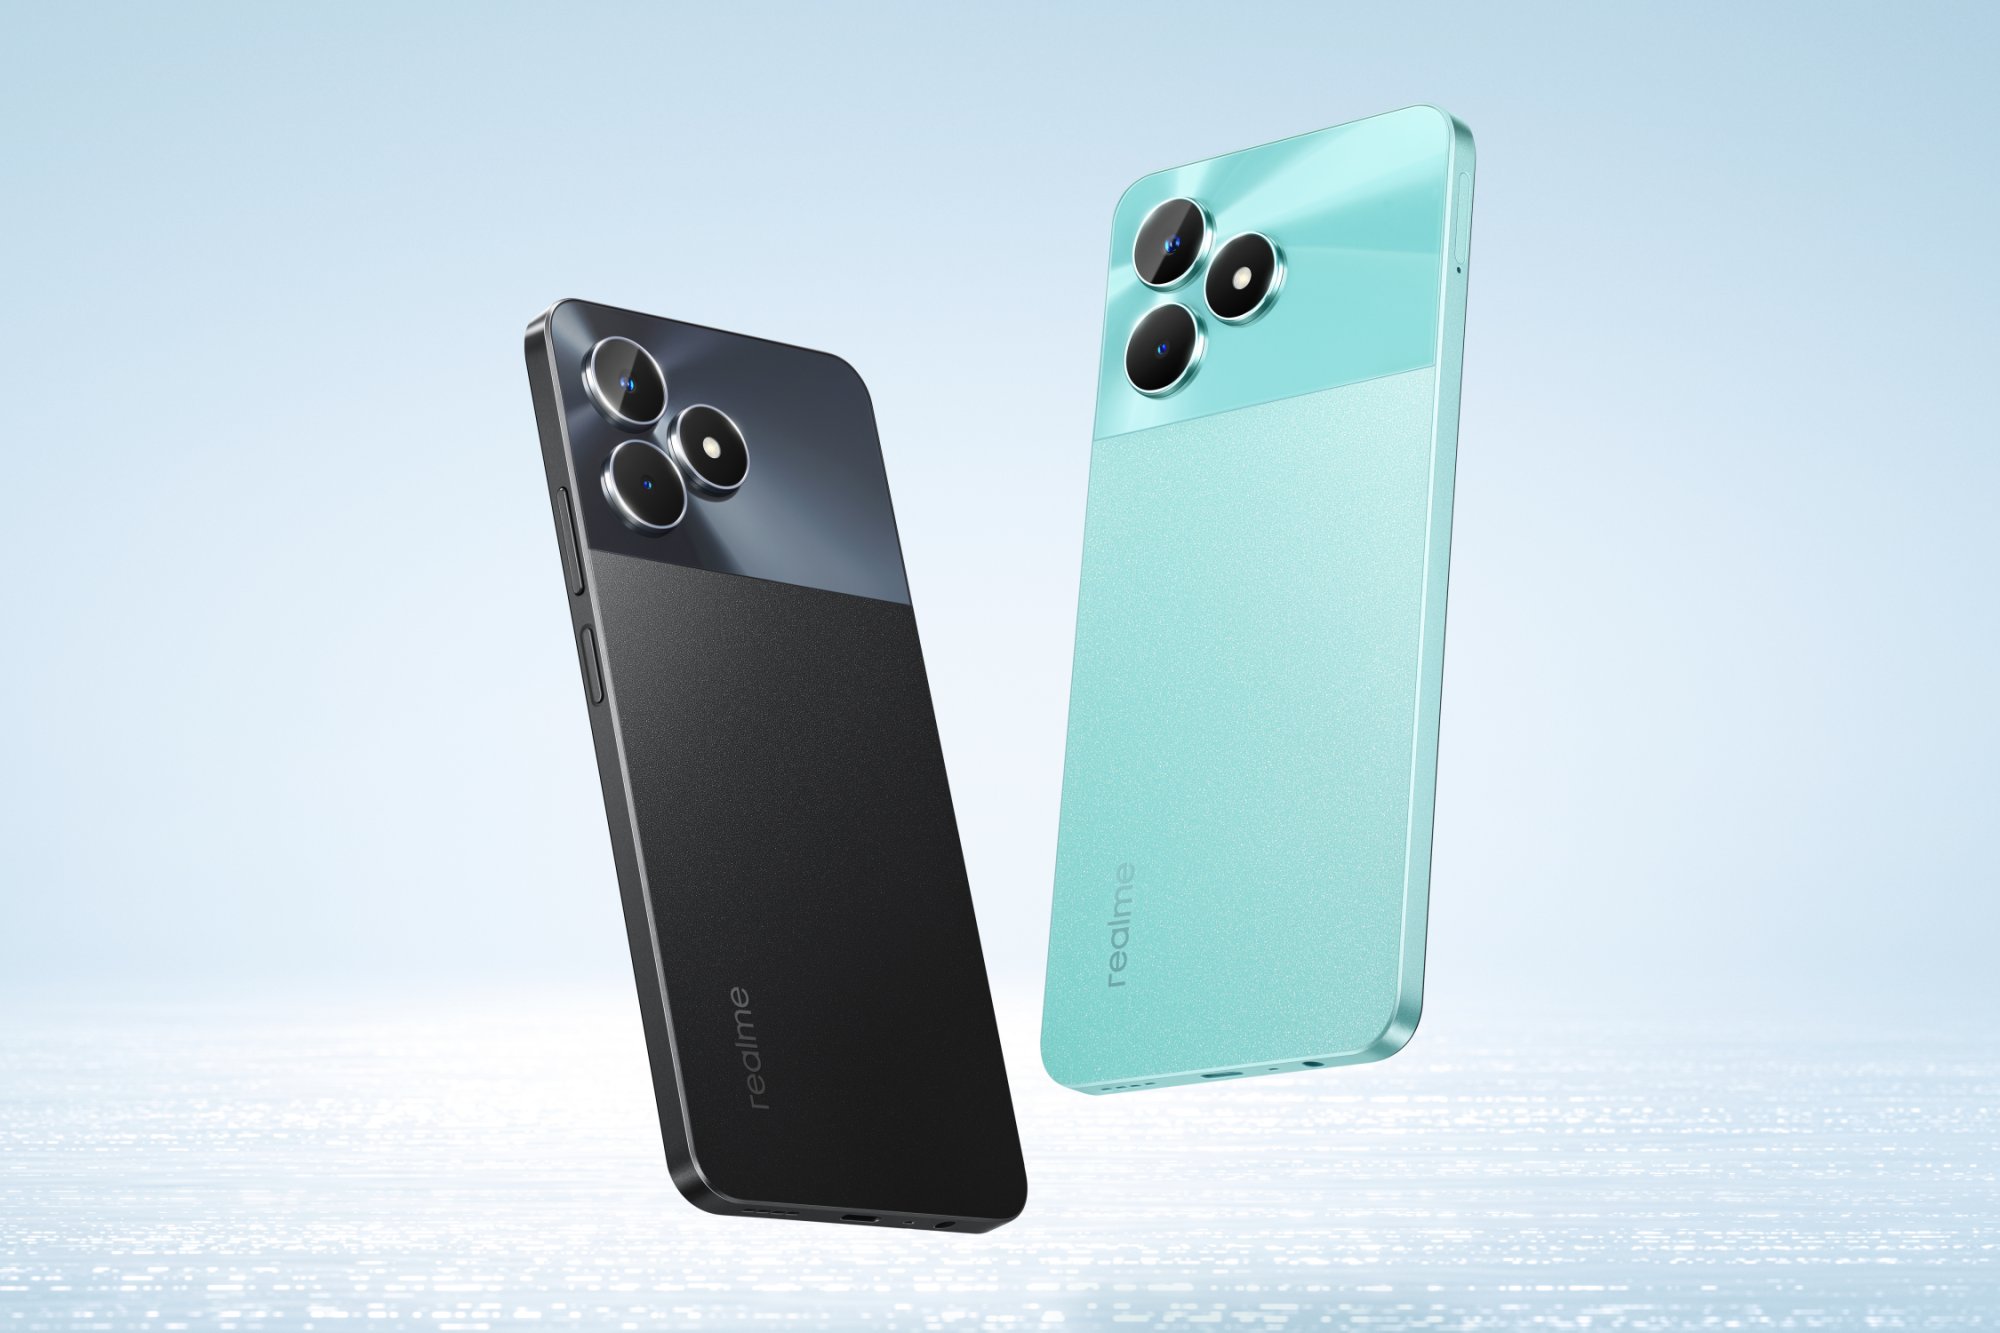 Realme C51: This budget Android smartphone comes with 'Dynamic